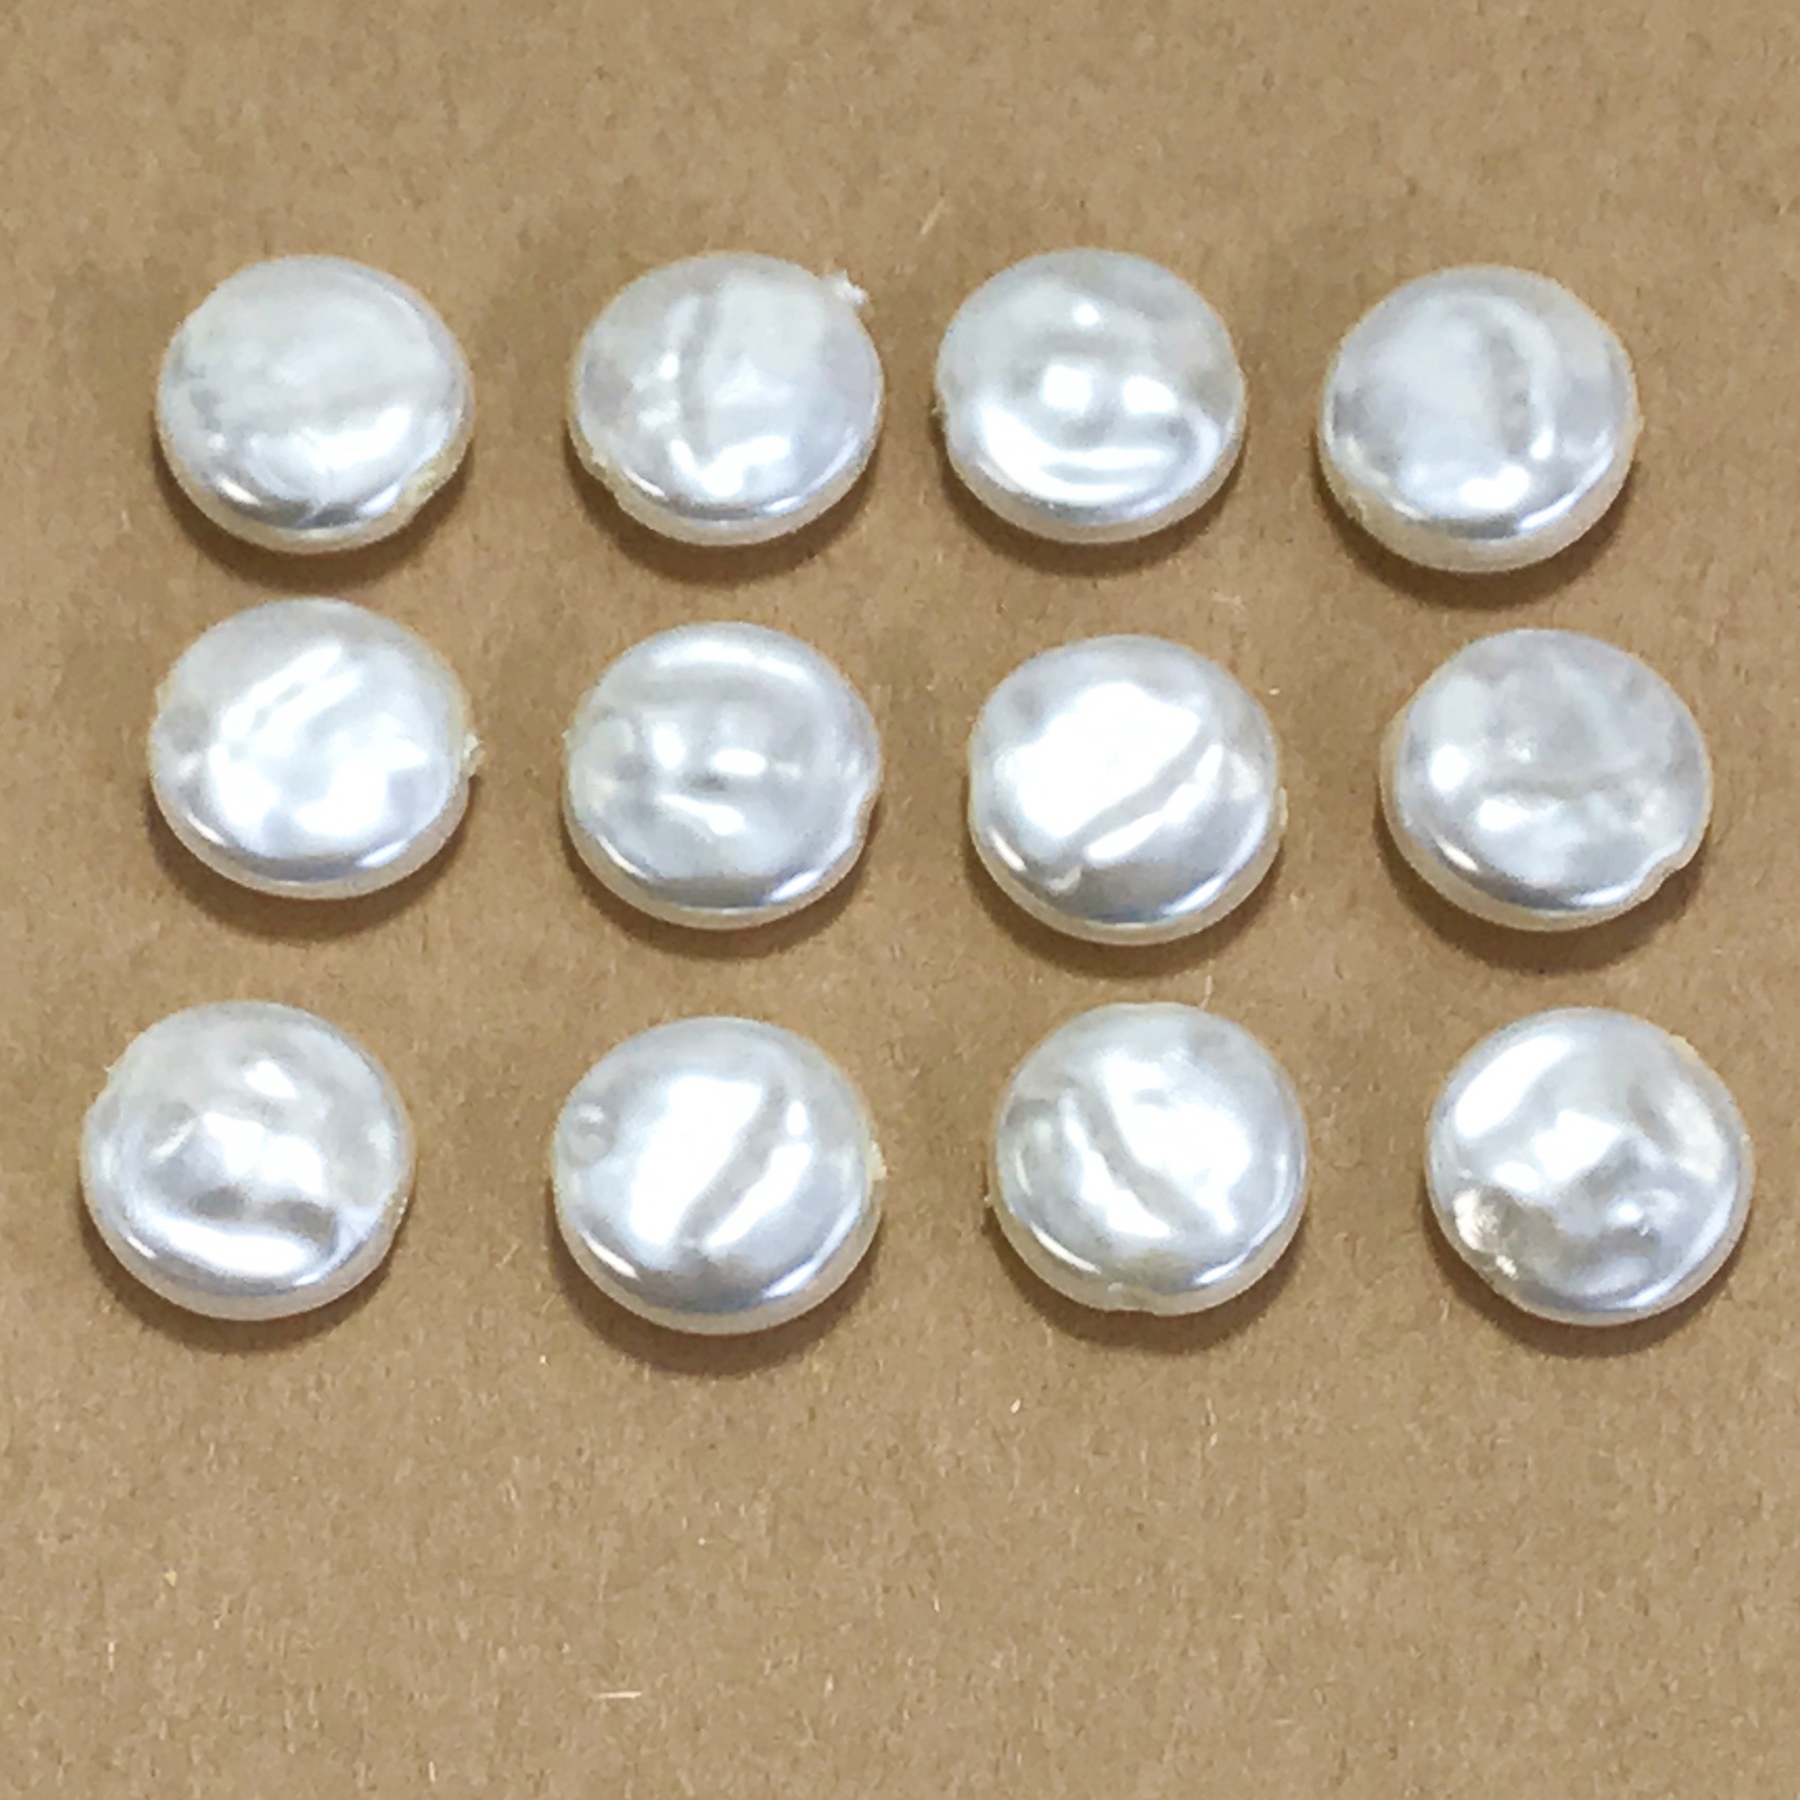 vintage baroque pearl beads, off white, 12mm, 01027, pearl beads, off white beads, baroque beads, baroque pearls, vintage pearls, bsueboutiques, bead stringing, vintage jewelry jewelry making coin style coin